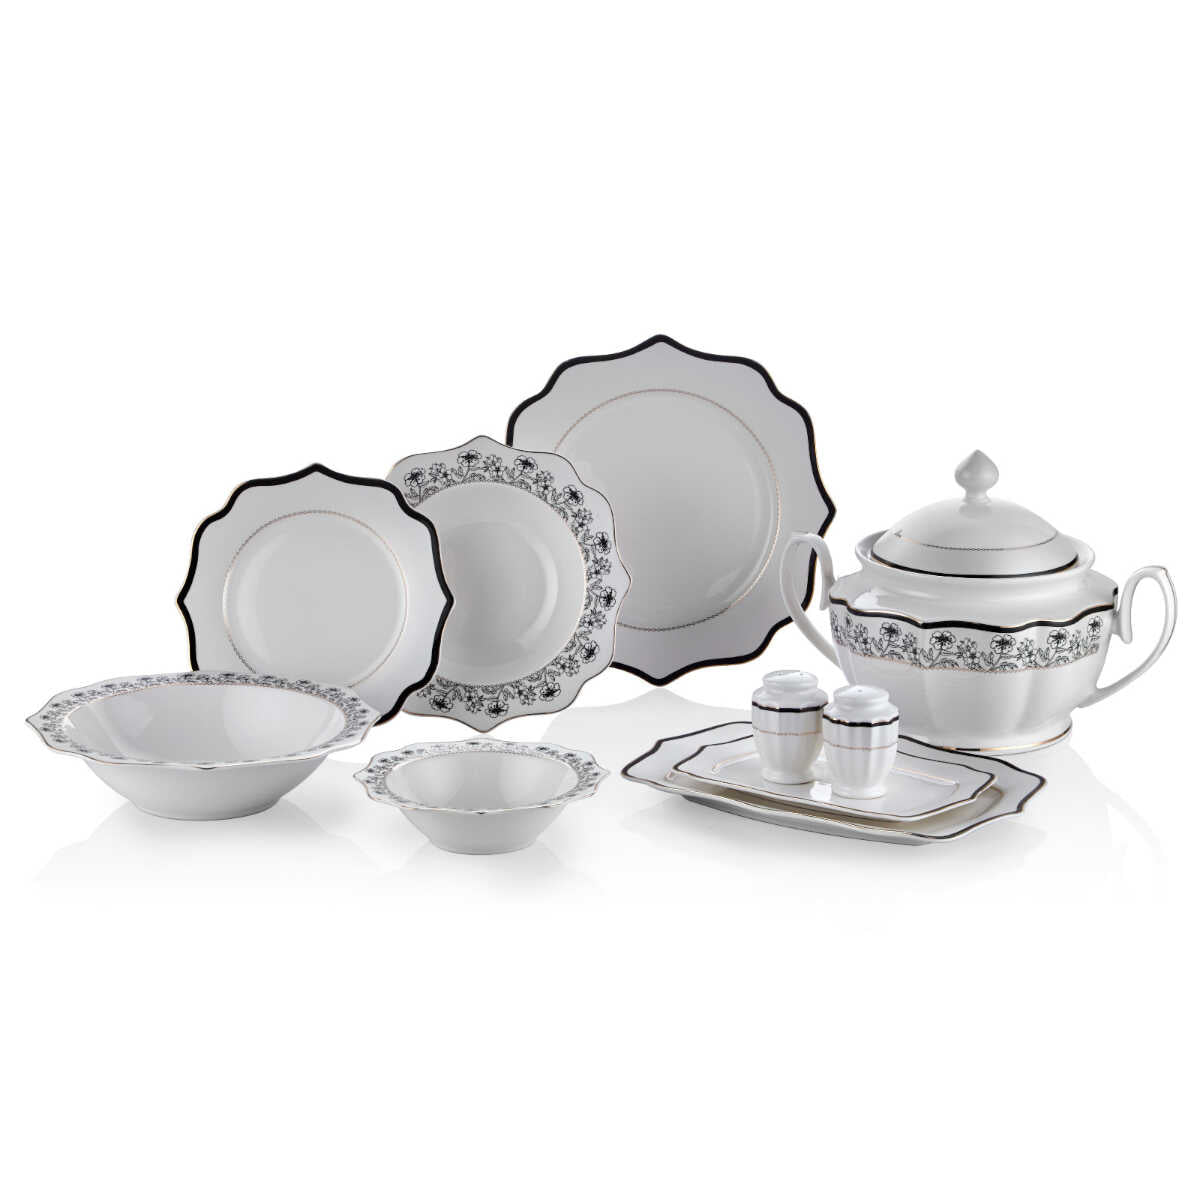 Royal London Daffodil 60 Piece Dinner Set for 12 People